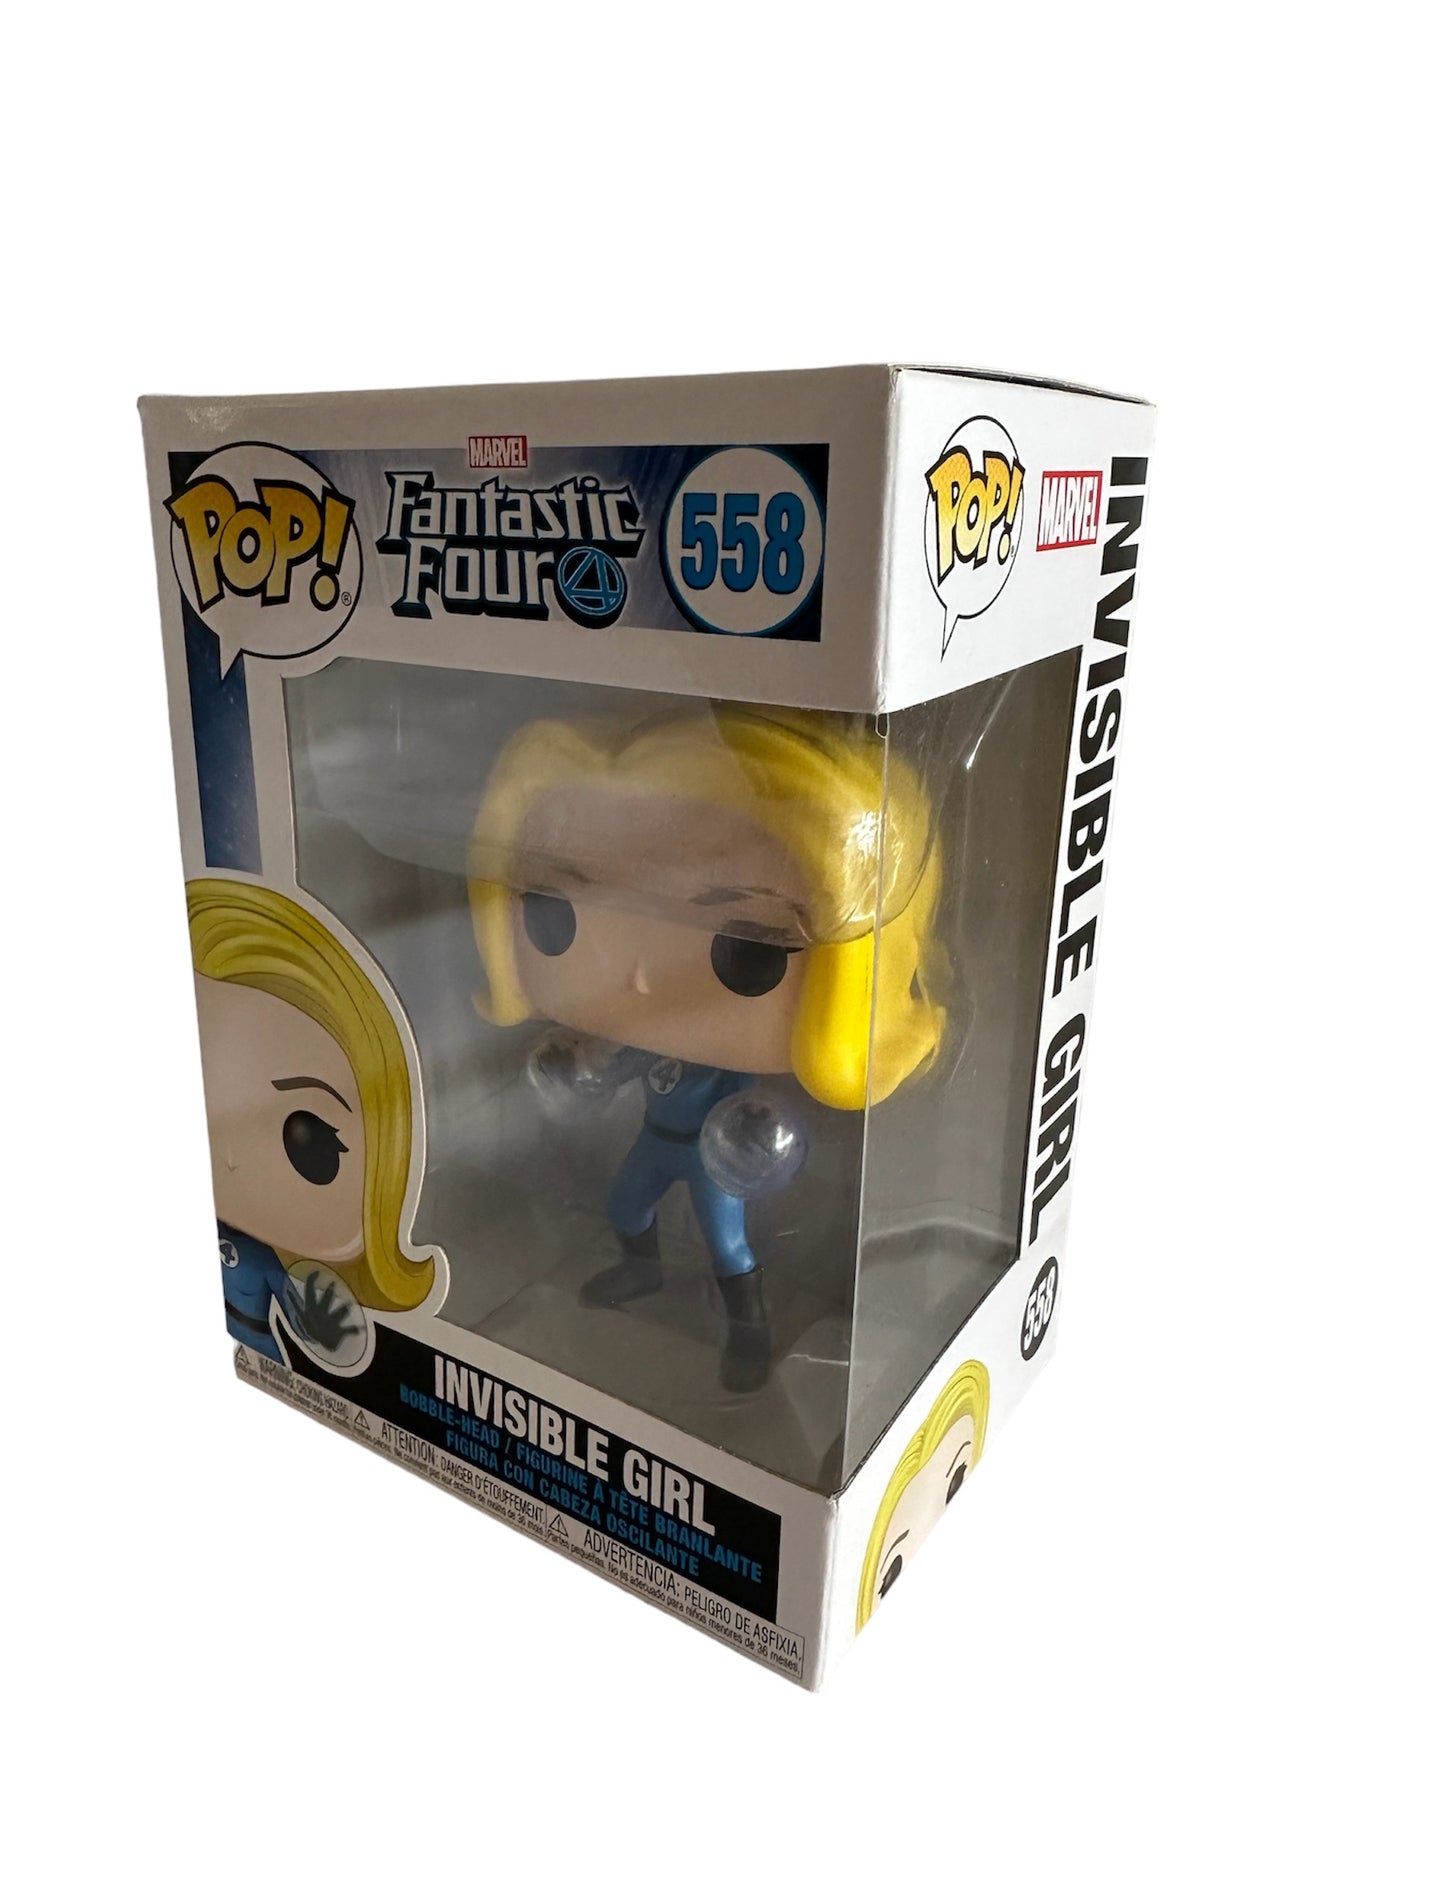 POP! 2019 Marvels The Fantastic Four Pop Vinyl Figure - The Invisible Girl Sue Storm Bobble-Head No. 558 - Brand New Shop Stock Room Find